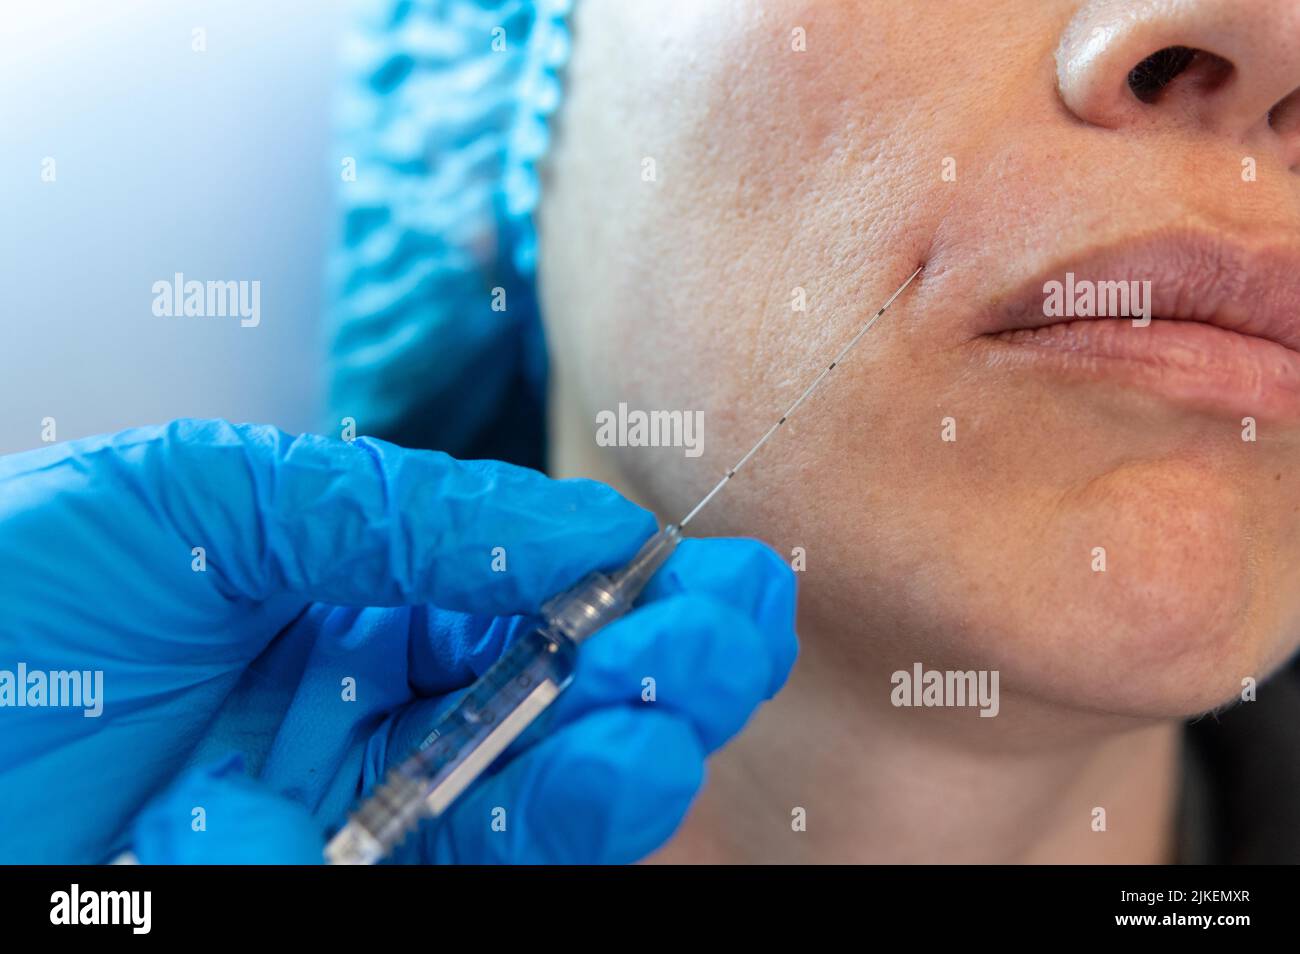 closeup of a syringe in a beautifying treatment applying hyaluronic acid to a person next to the lips Stock Photo